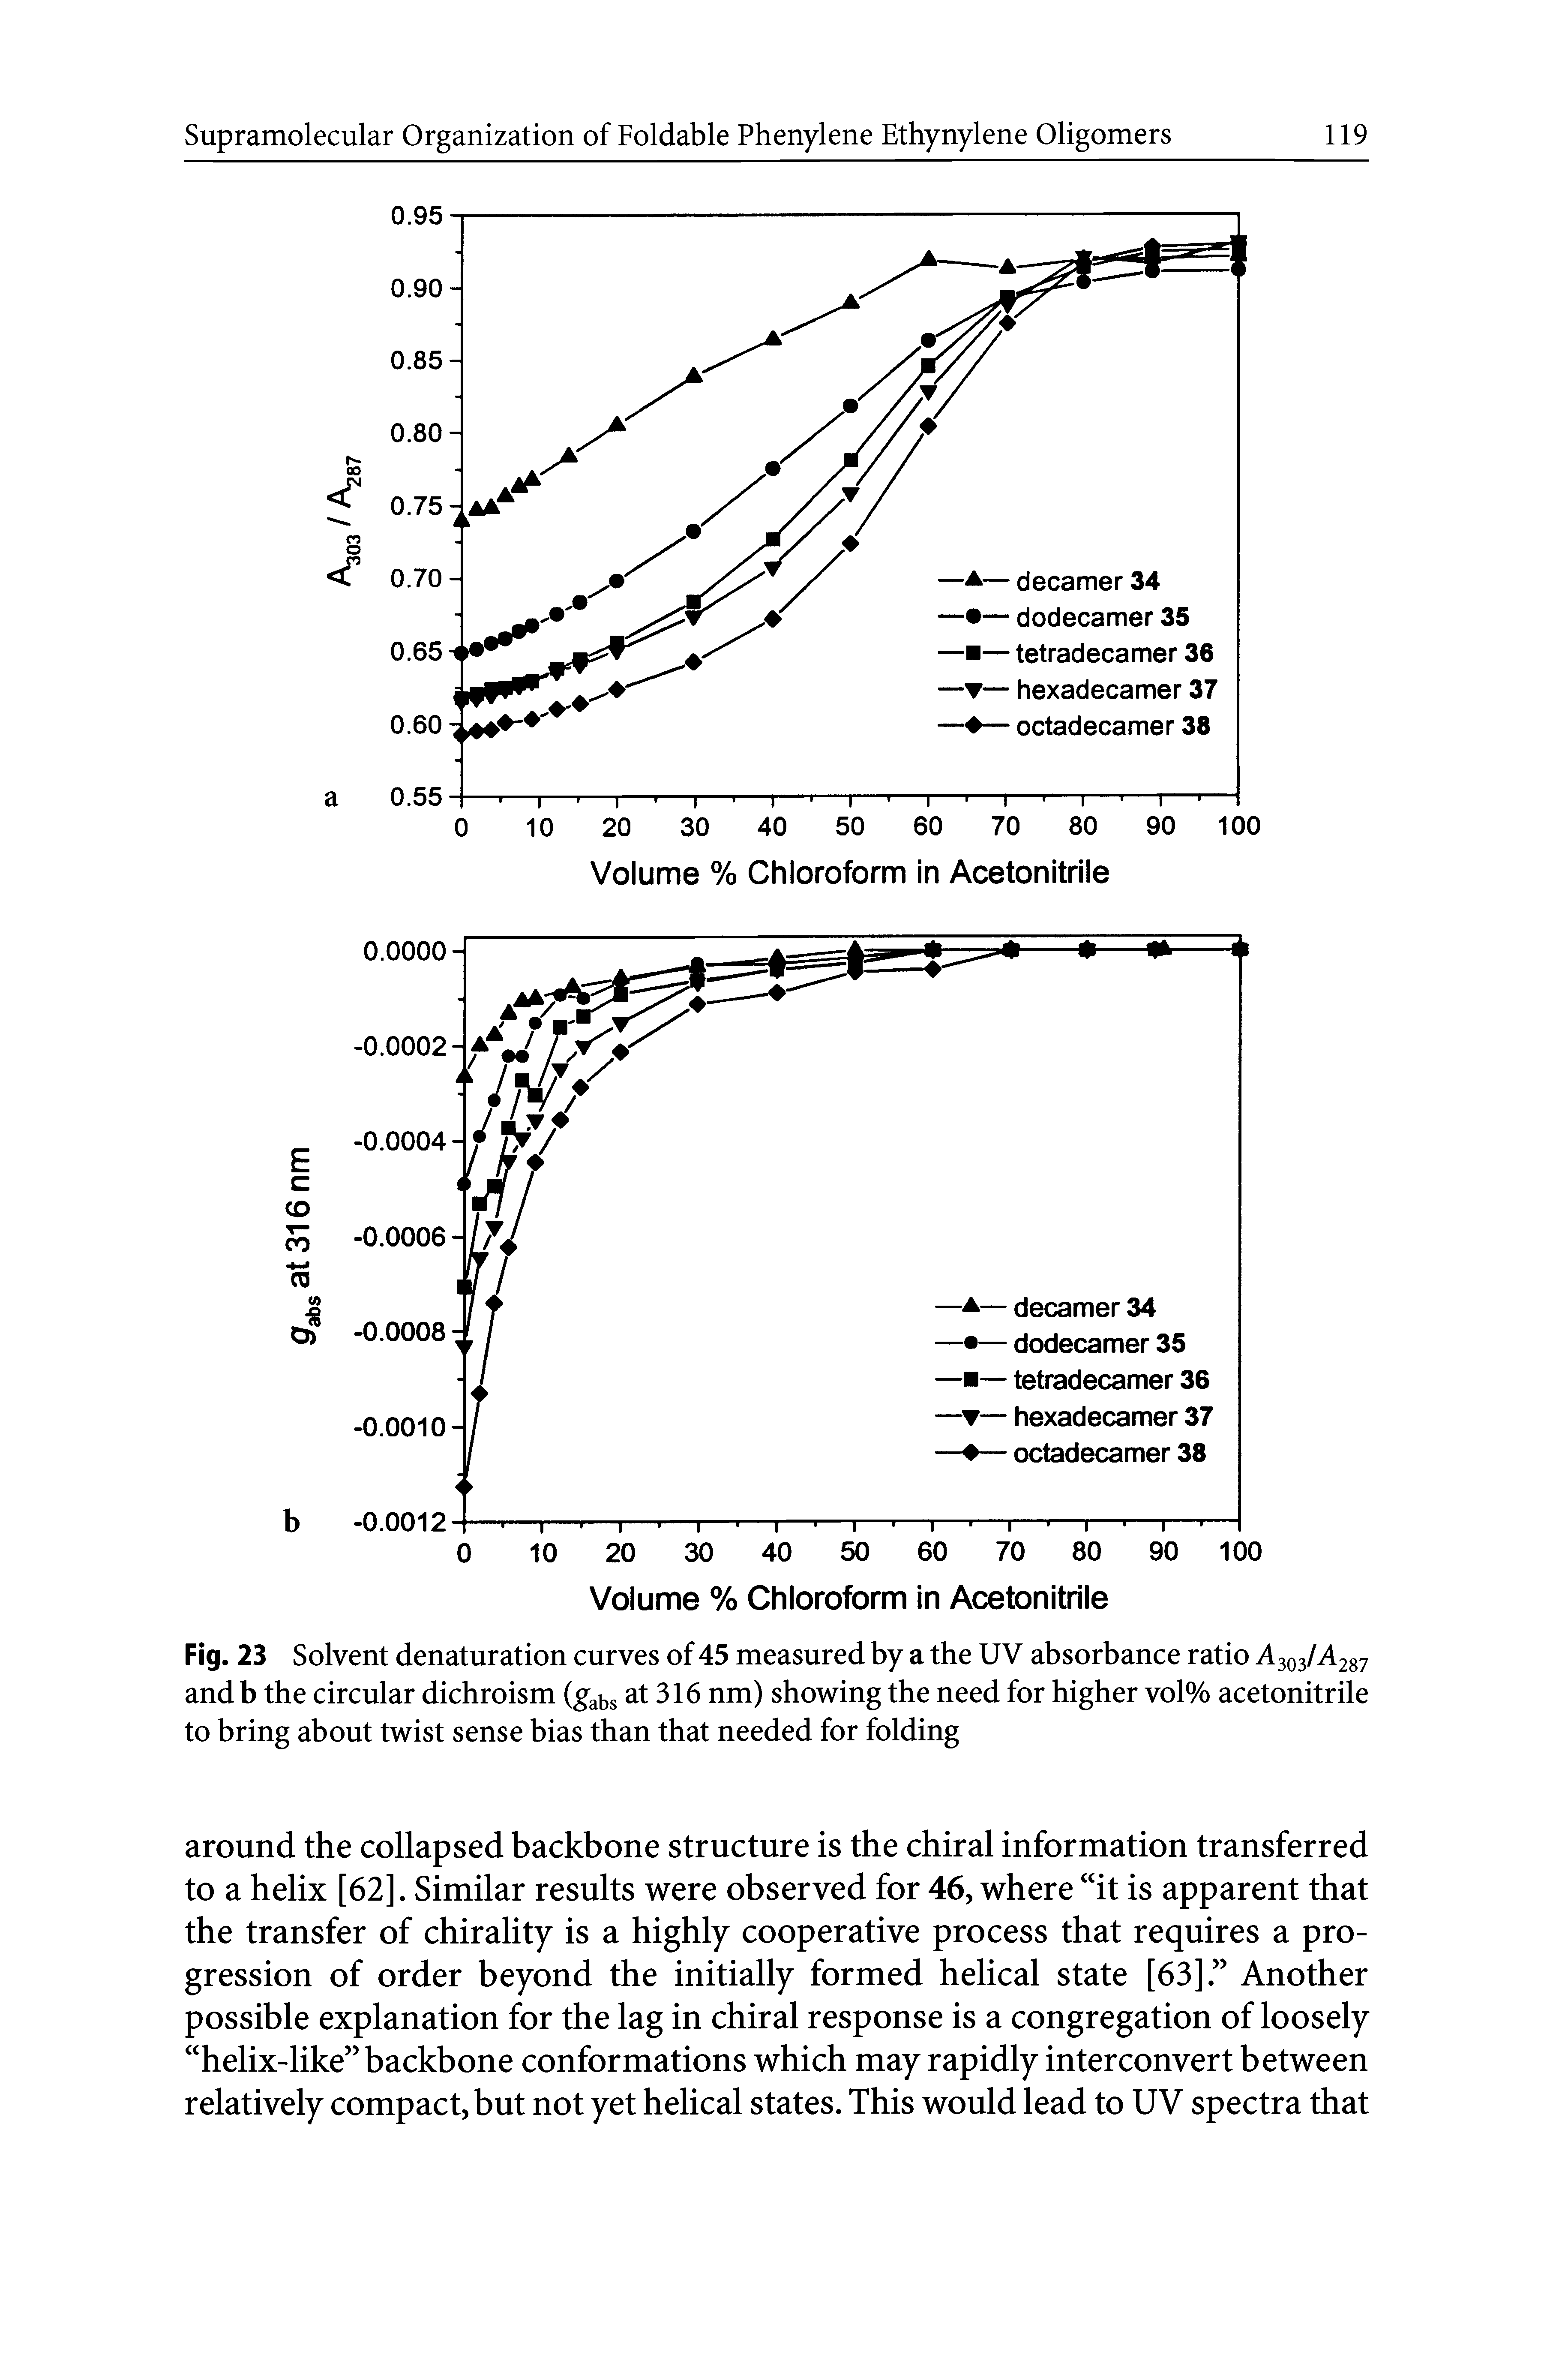 Fig. 23 Solvent denaturation curves of 45 measured by a the UV absorbance ratio A303M287 and b the circular dichroism (g bs at 316 nm) showing the need for higher vol% acetonitrile to bring about twist sense bias than that needed for folding...